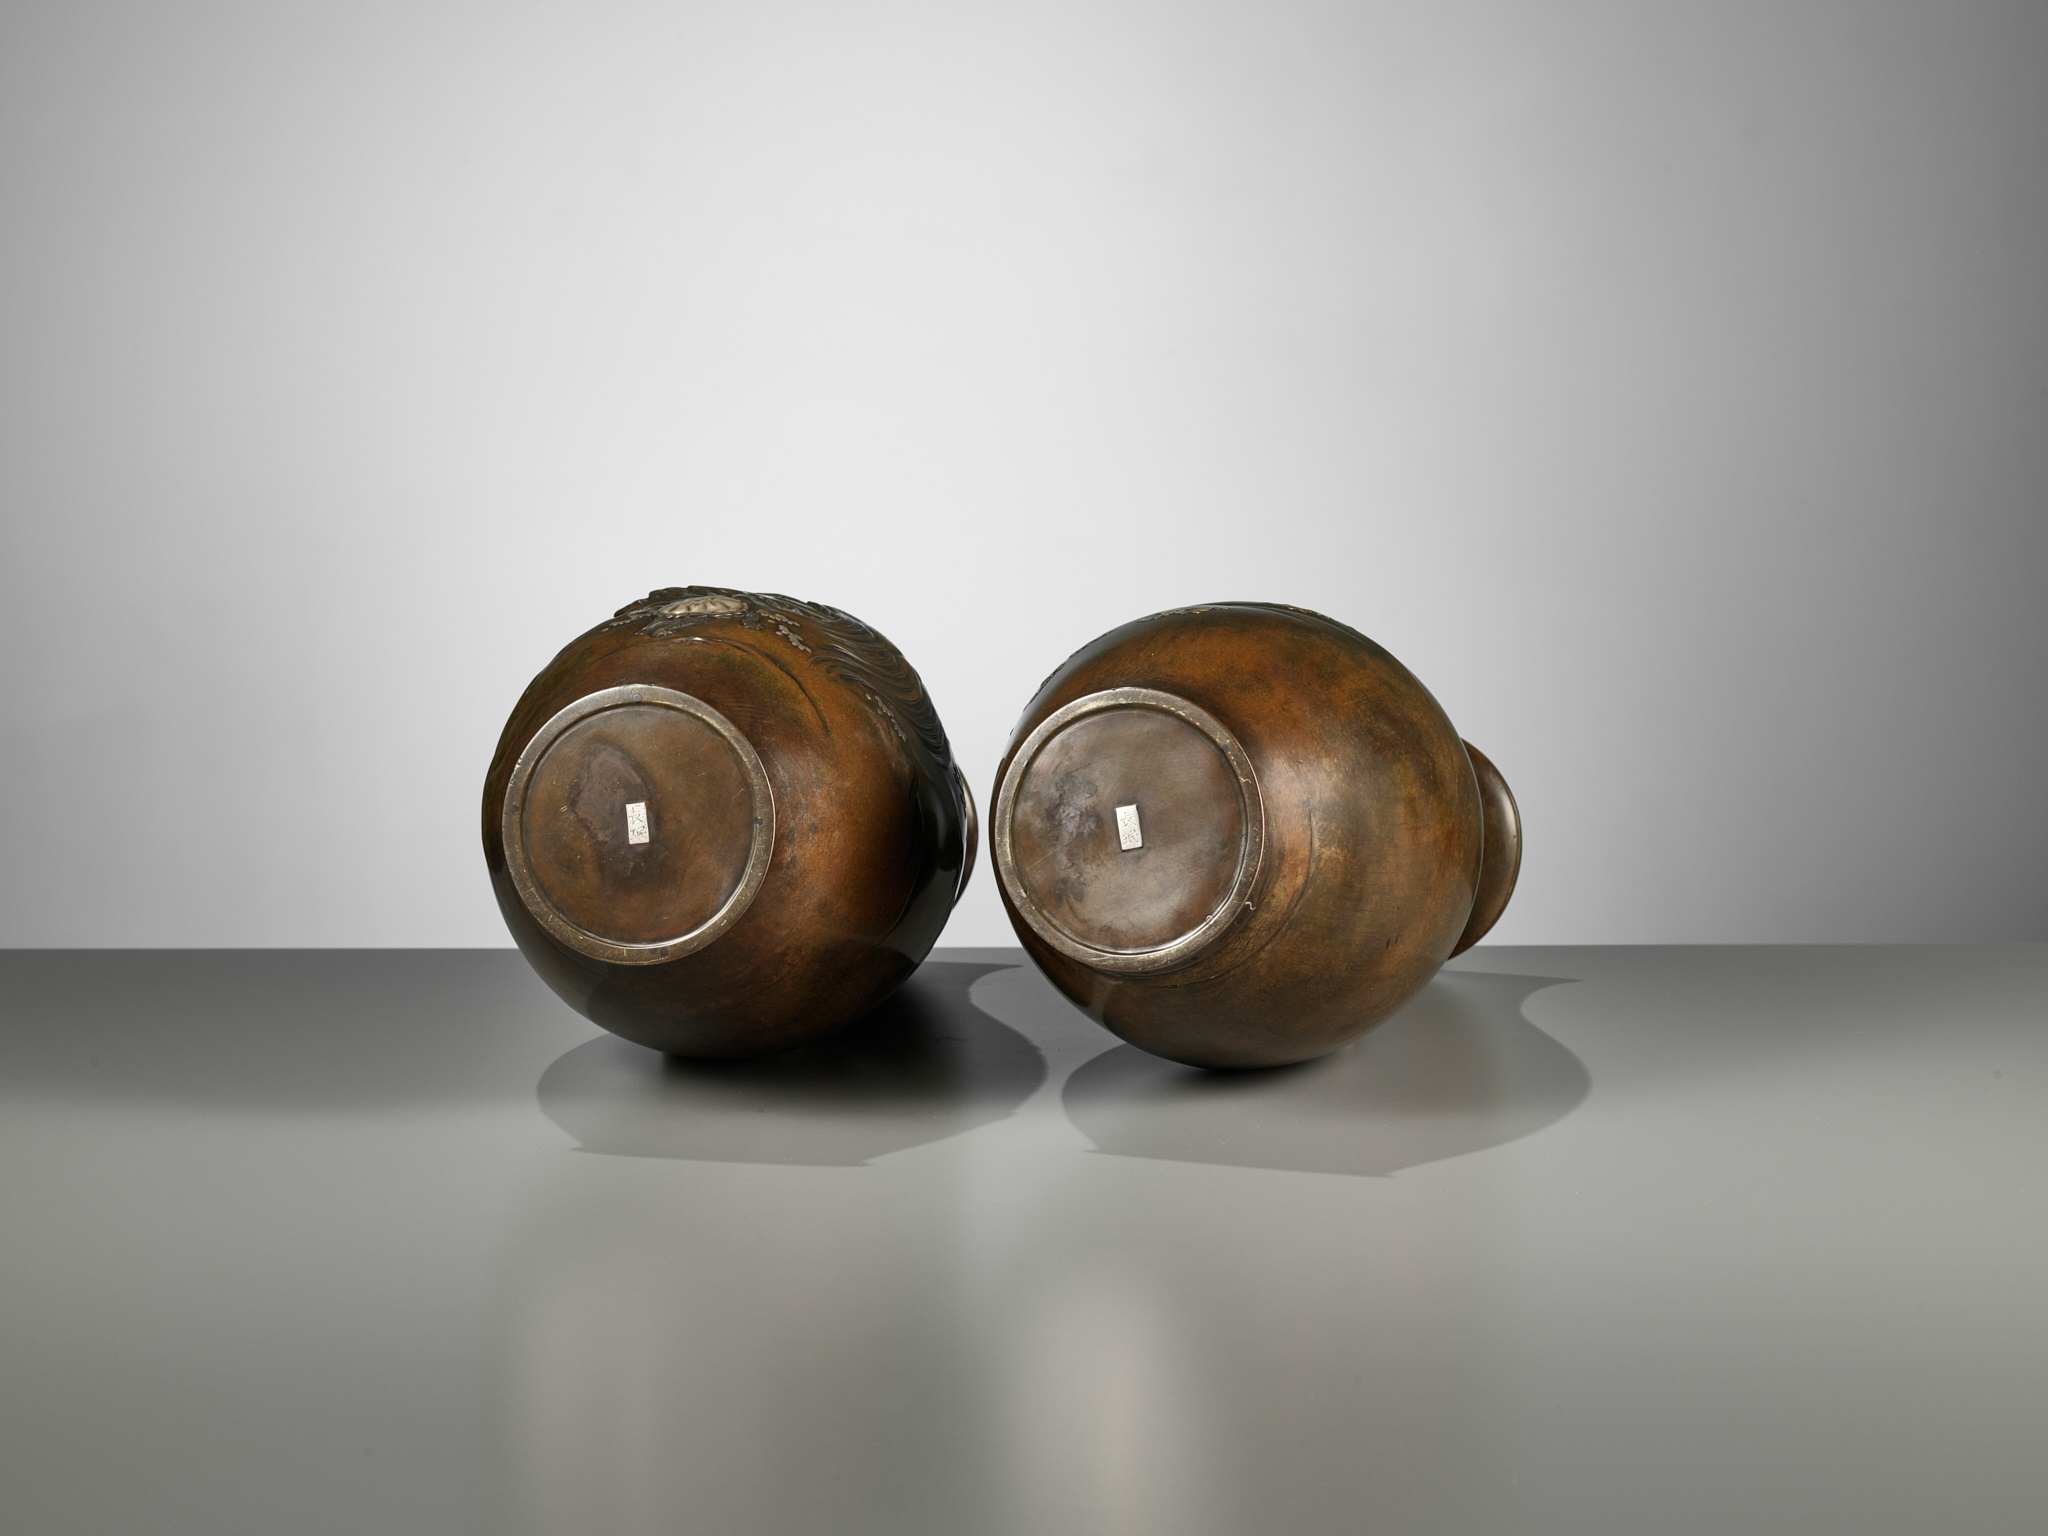 CHOMIN: A SUPERB PAIR OF INLAID BRONZE VASES WITH MINOGAME AND GEESE - Image 12 of 12